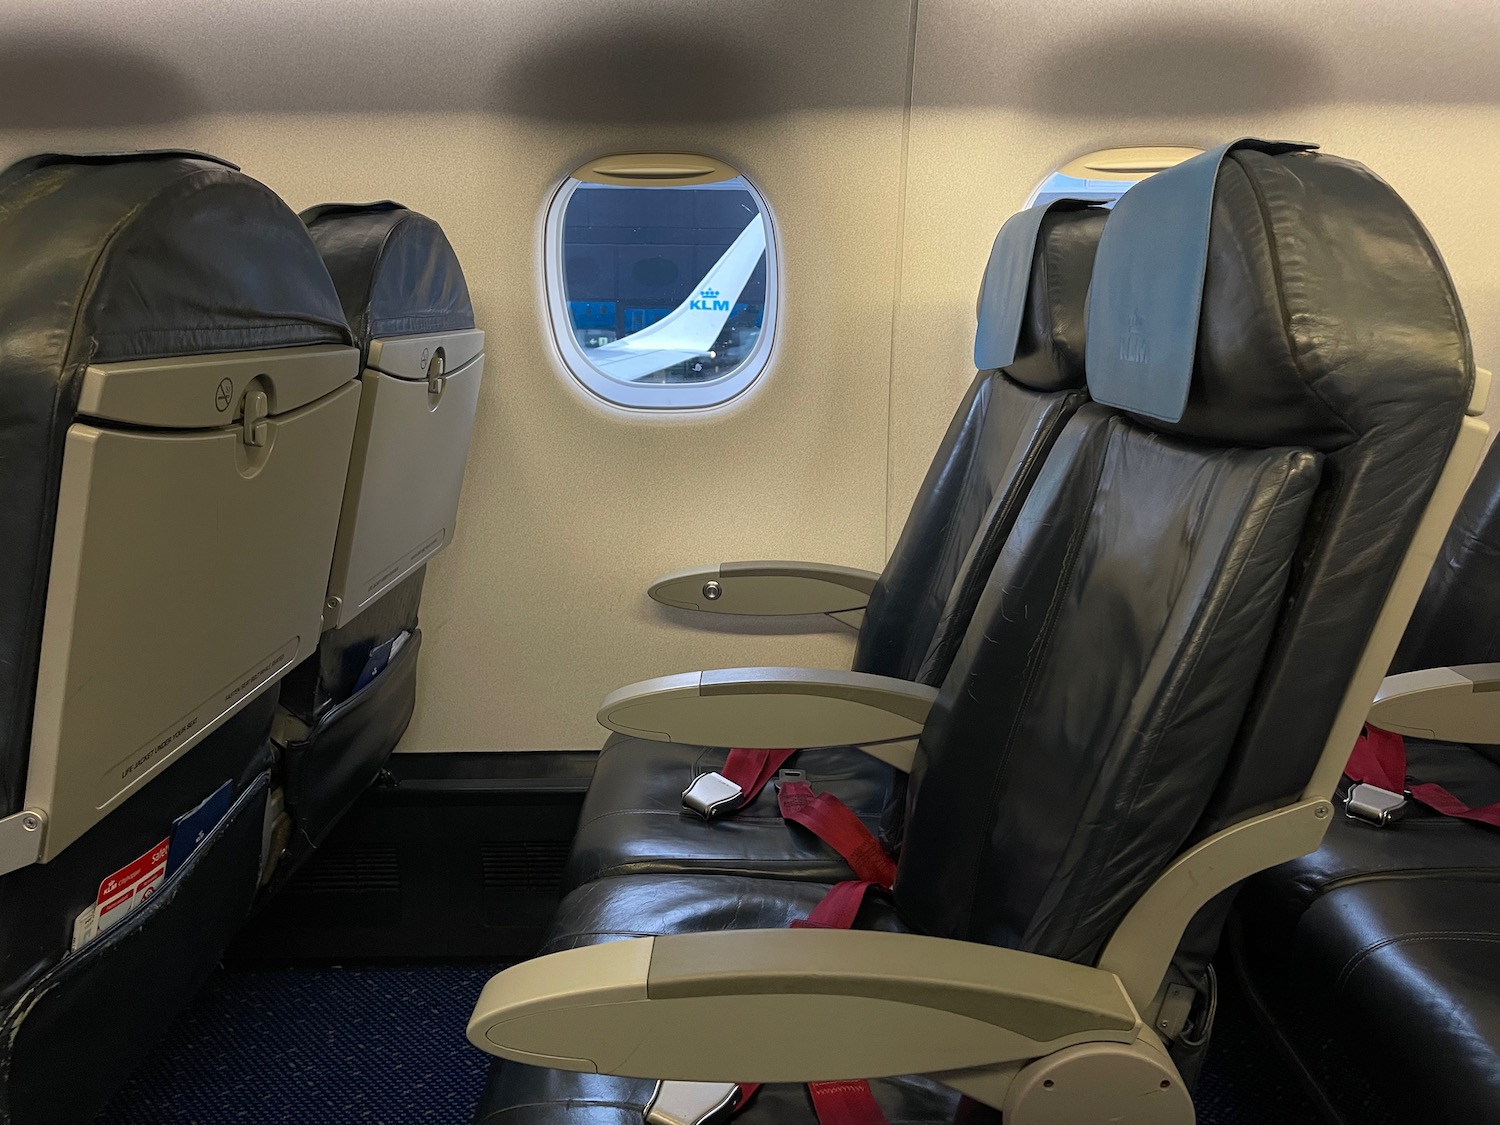 seats in an airplane with a seat belt